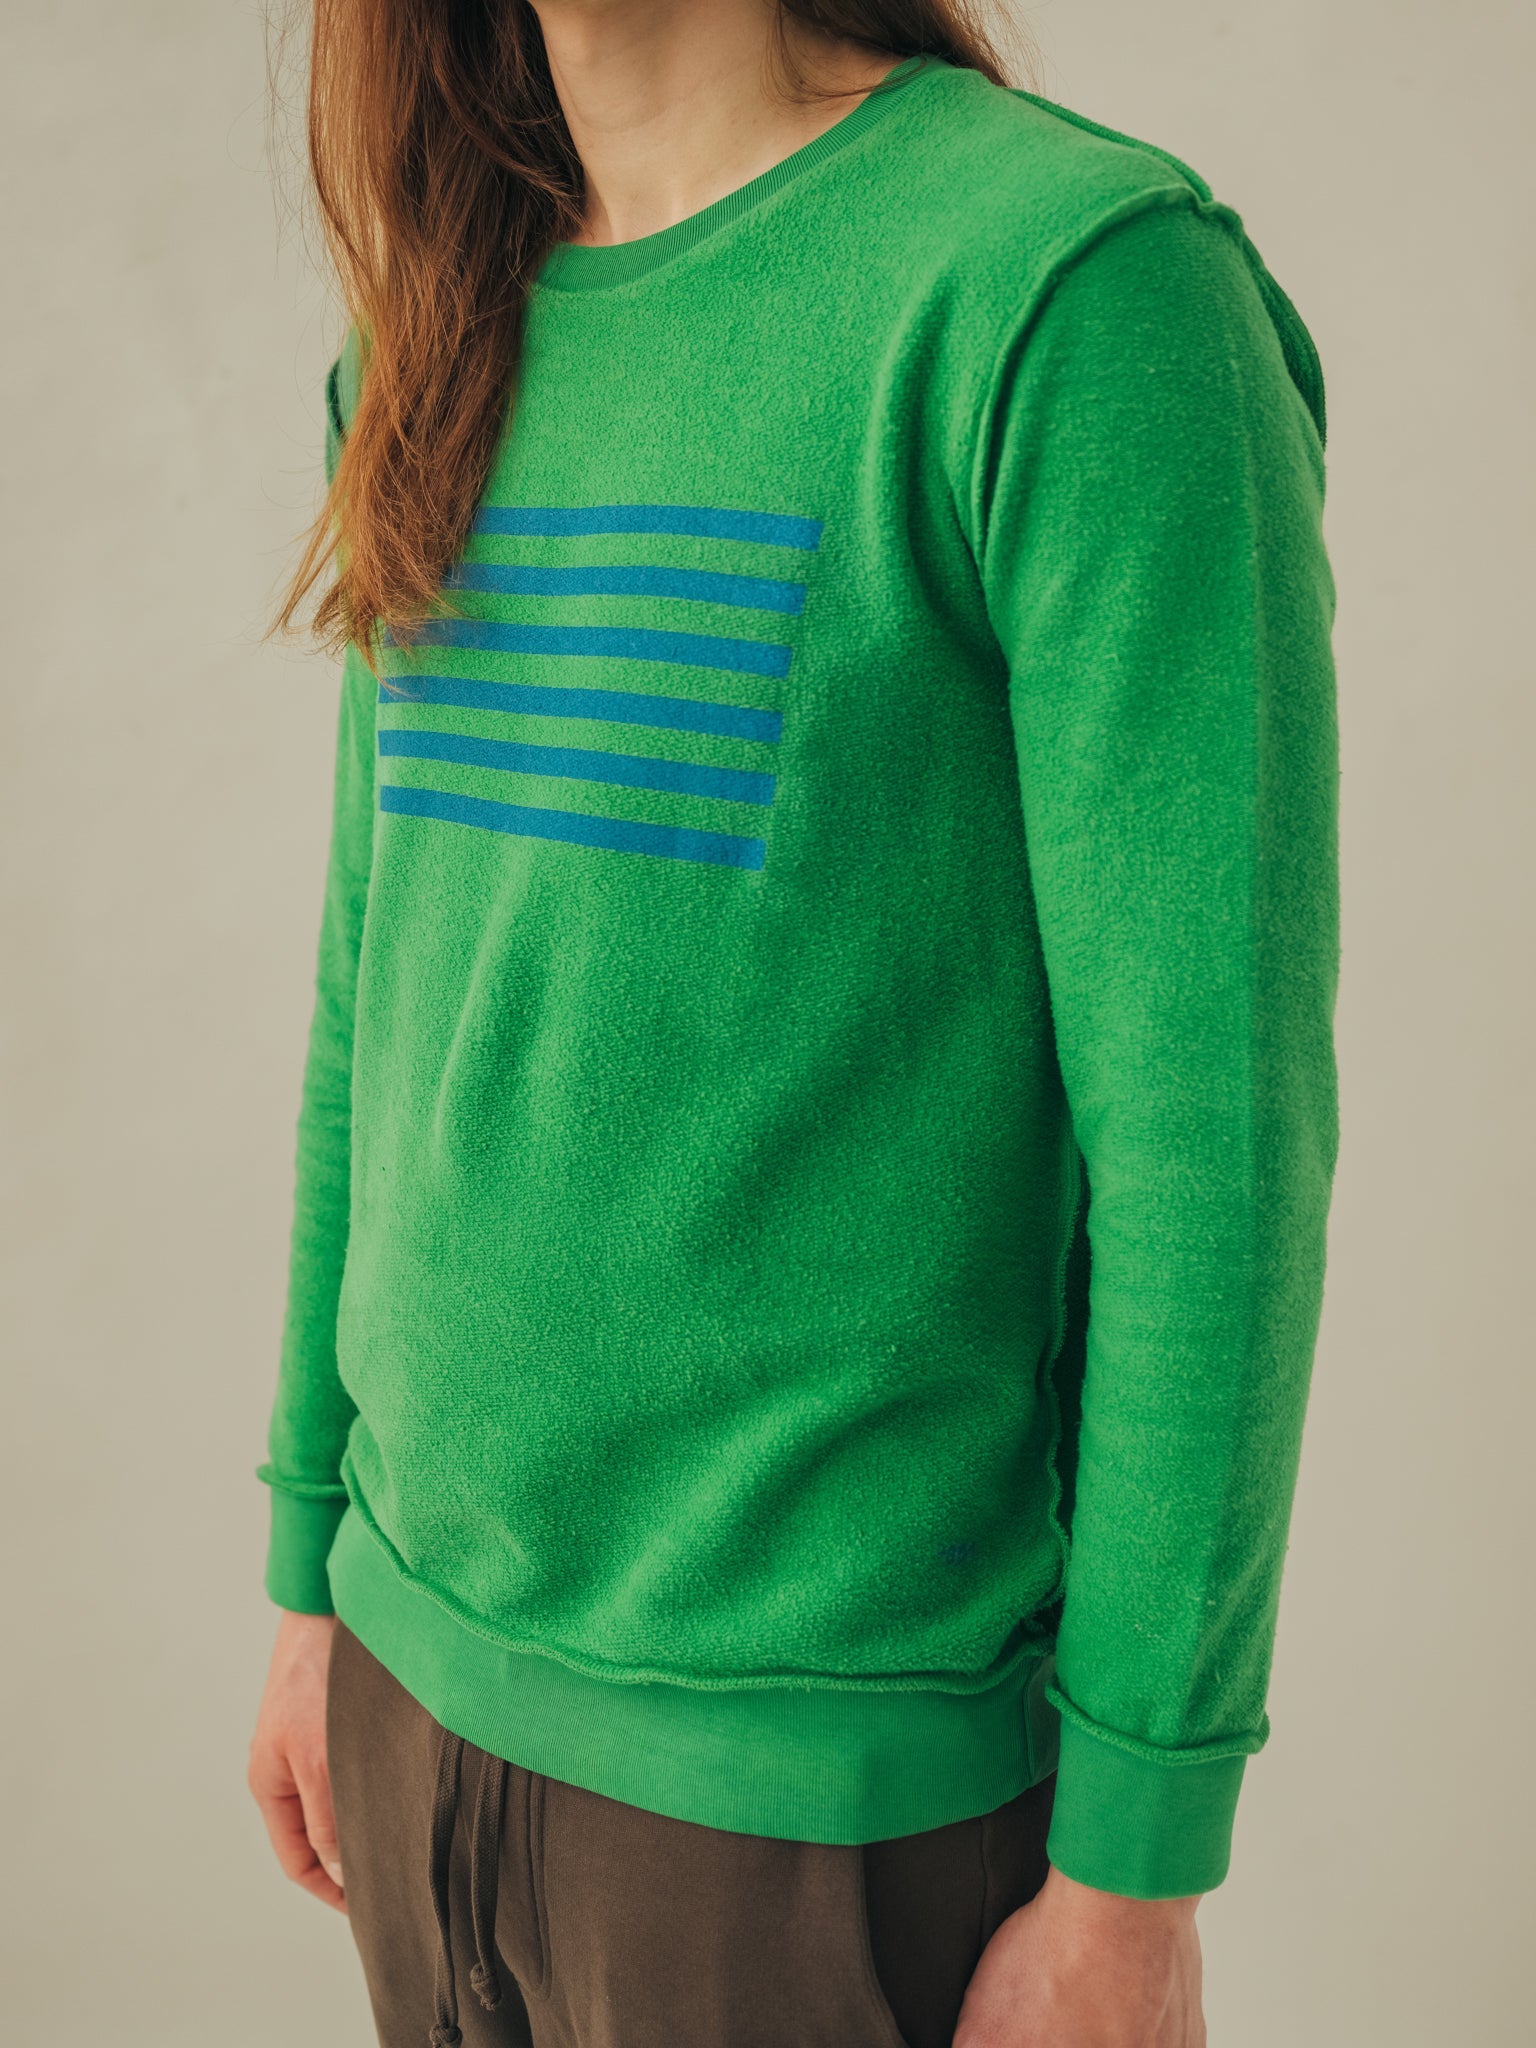 SWEATSHIRT GRAPHIC FREQUENCY INSIDE OUT TURTLE GREEN & STEEL BLUE